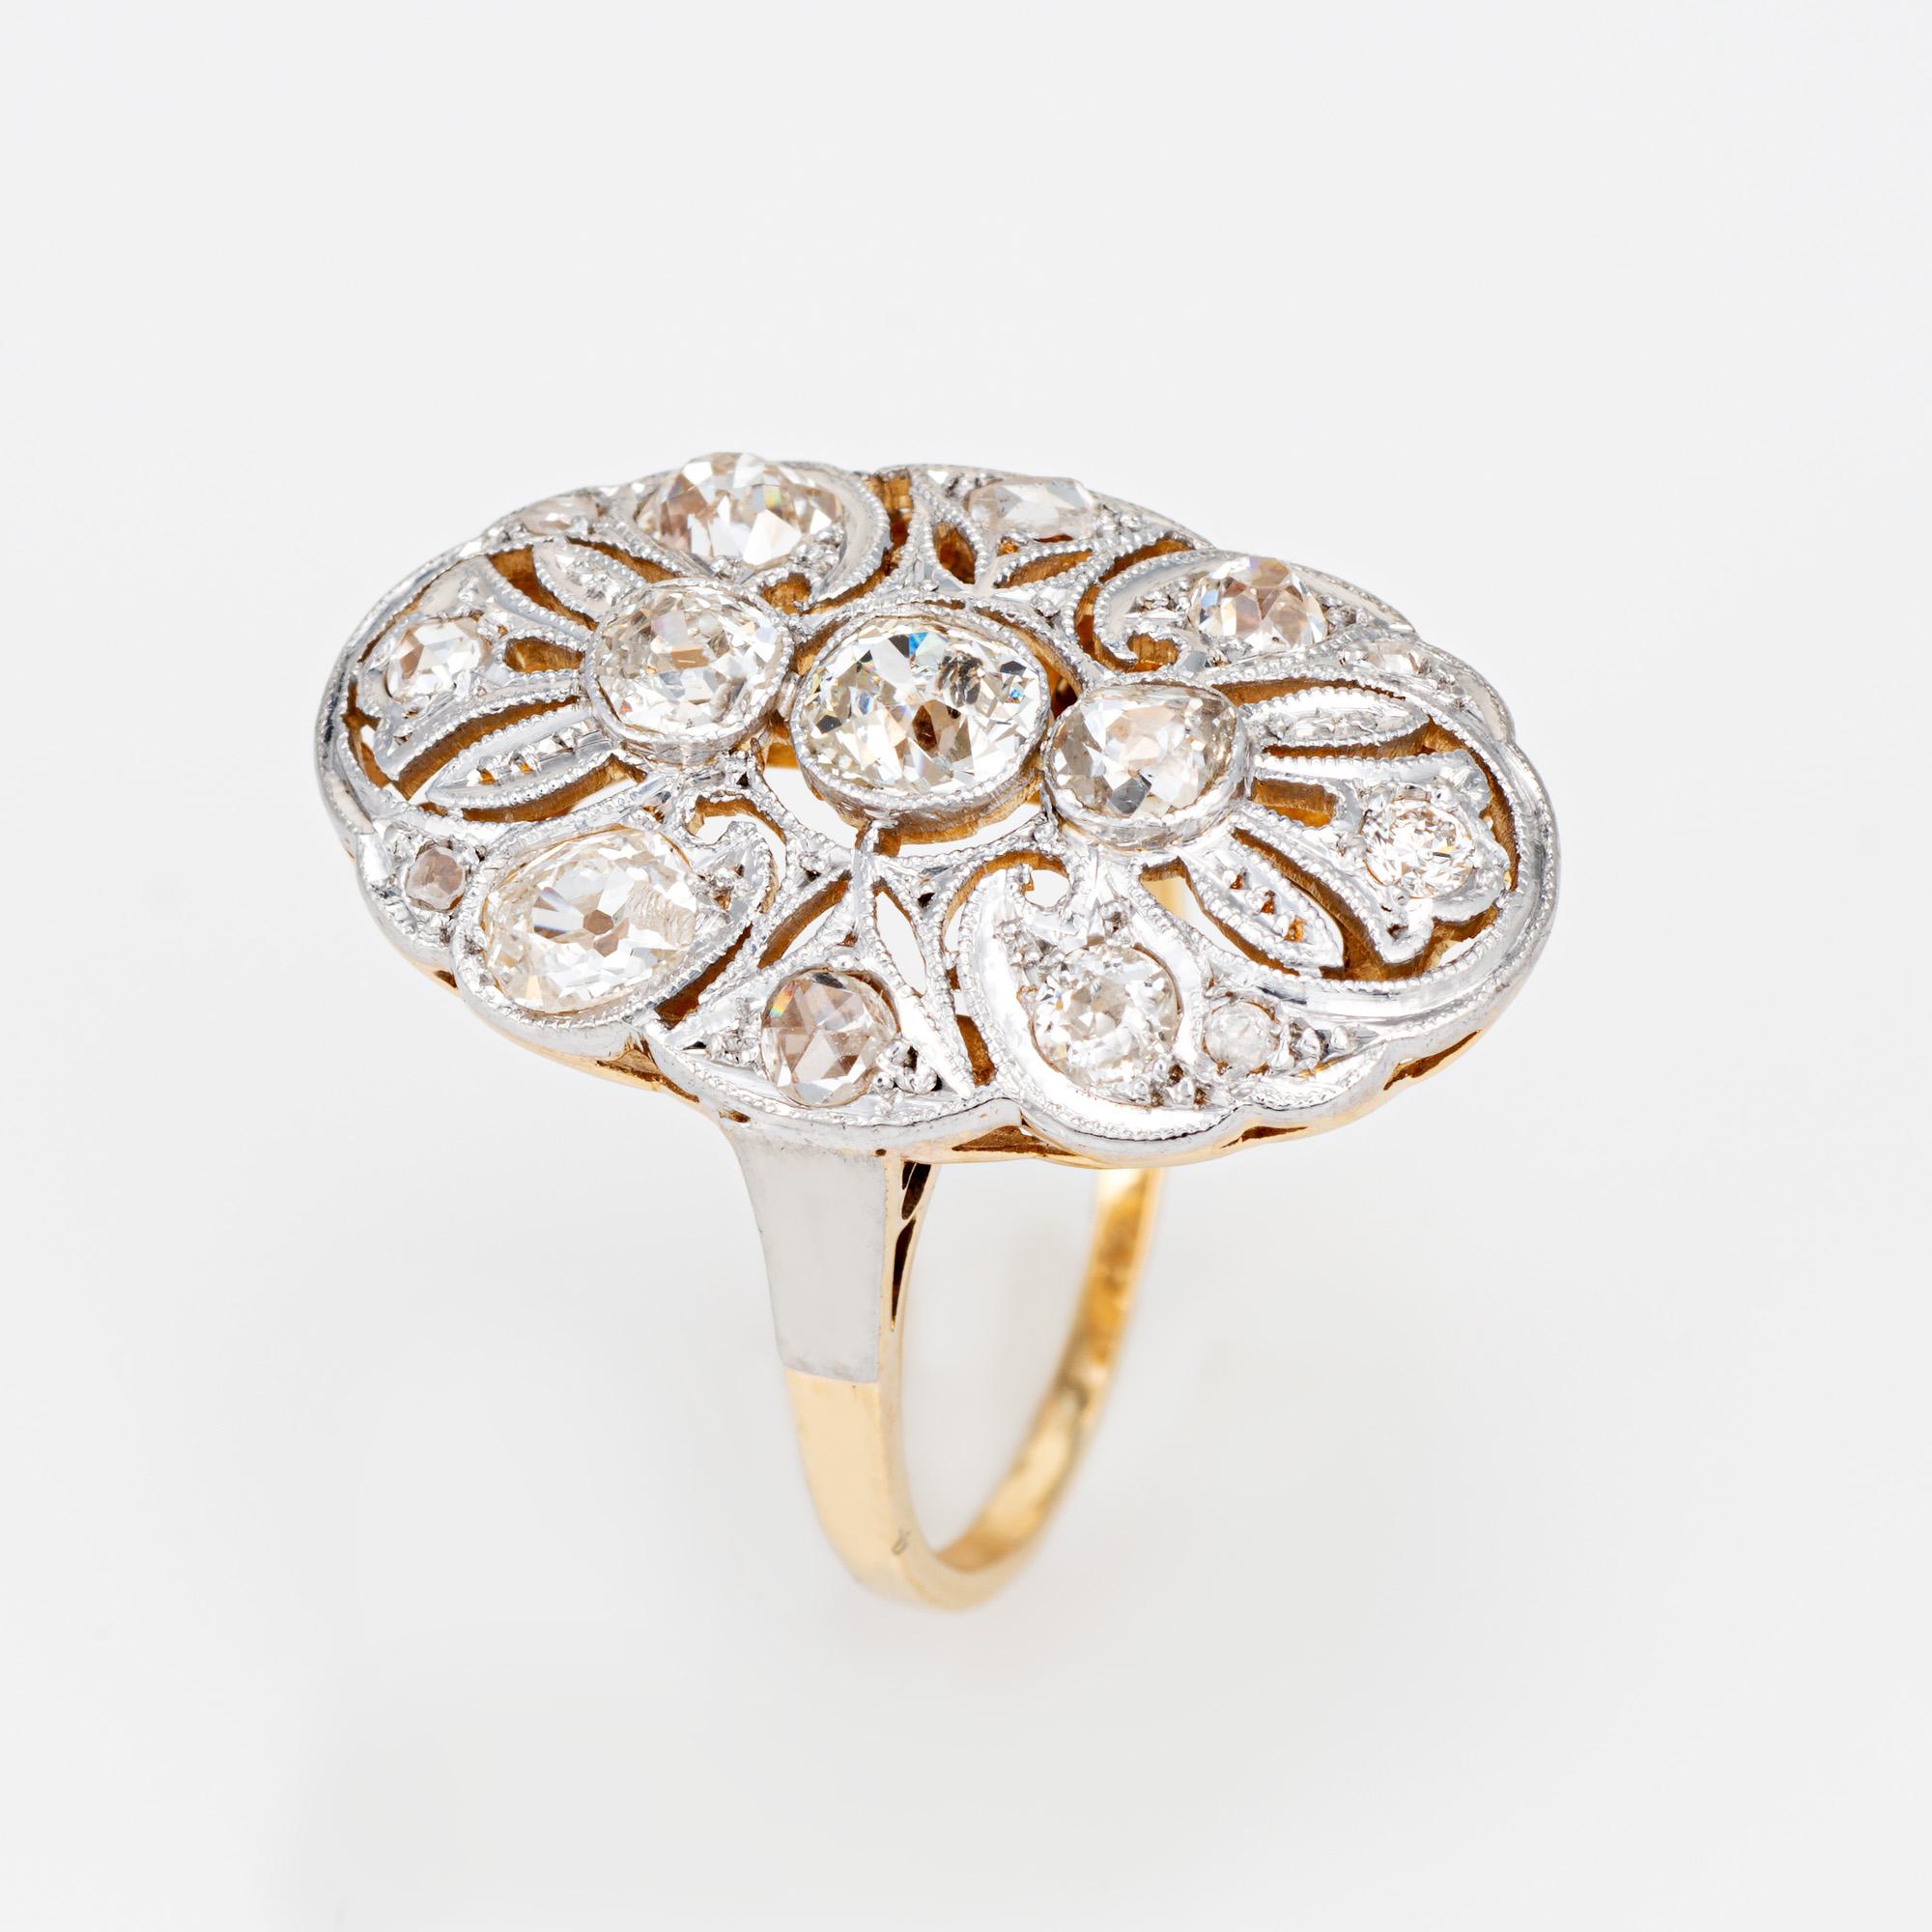 Finely detailed antique Art Nouveau diamond ring (circa 1910s) crafted in 18k yellow gold & 900 platinum. 

Old mine & rose cut diamonds total an estimated at 1 carat (estimated at K-L color and SI2-I2 clarity).   

The beautiful platinum topped